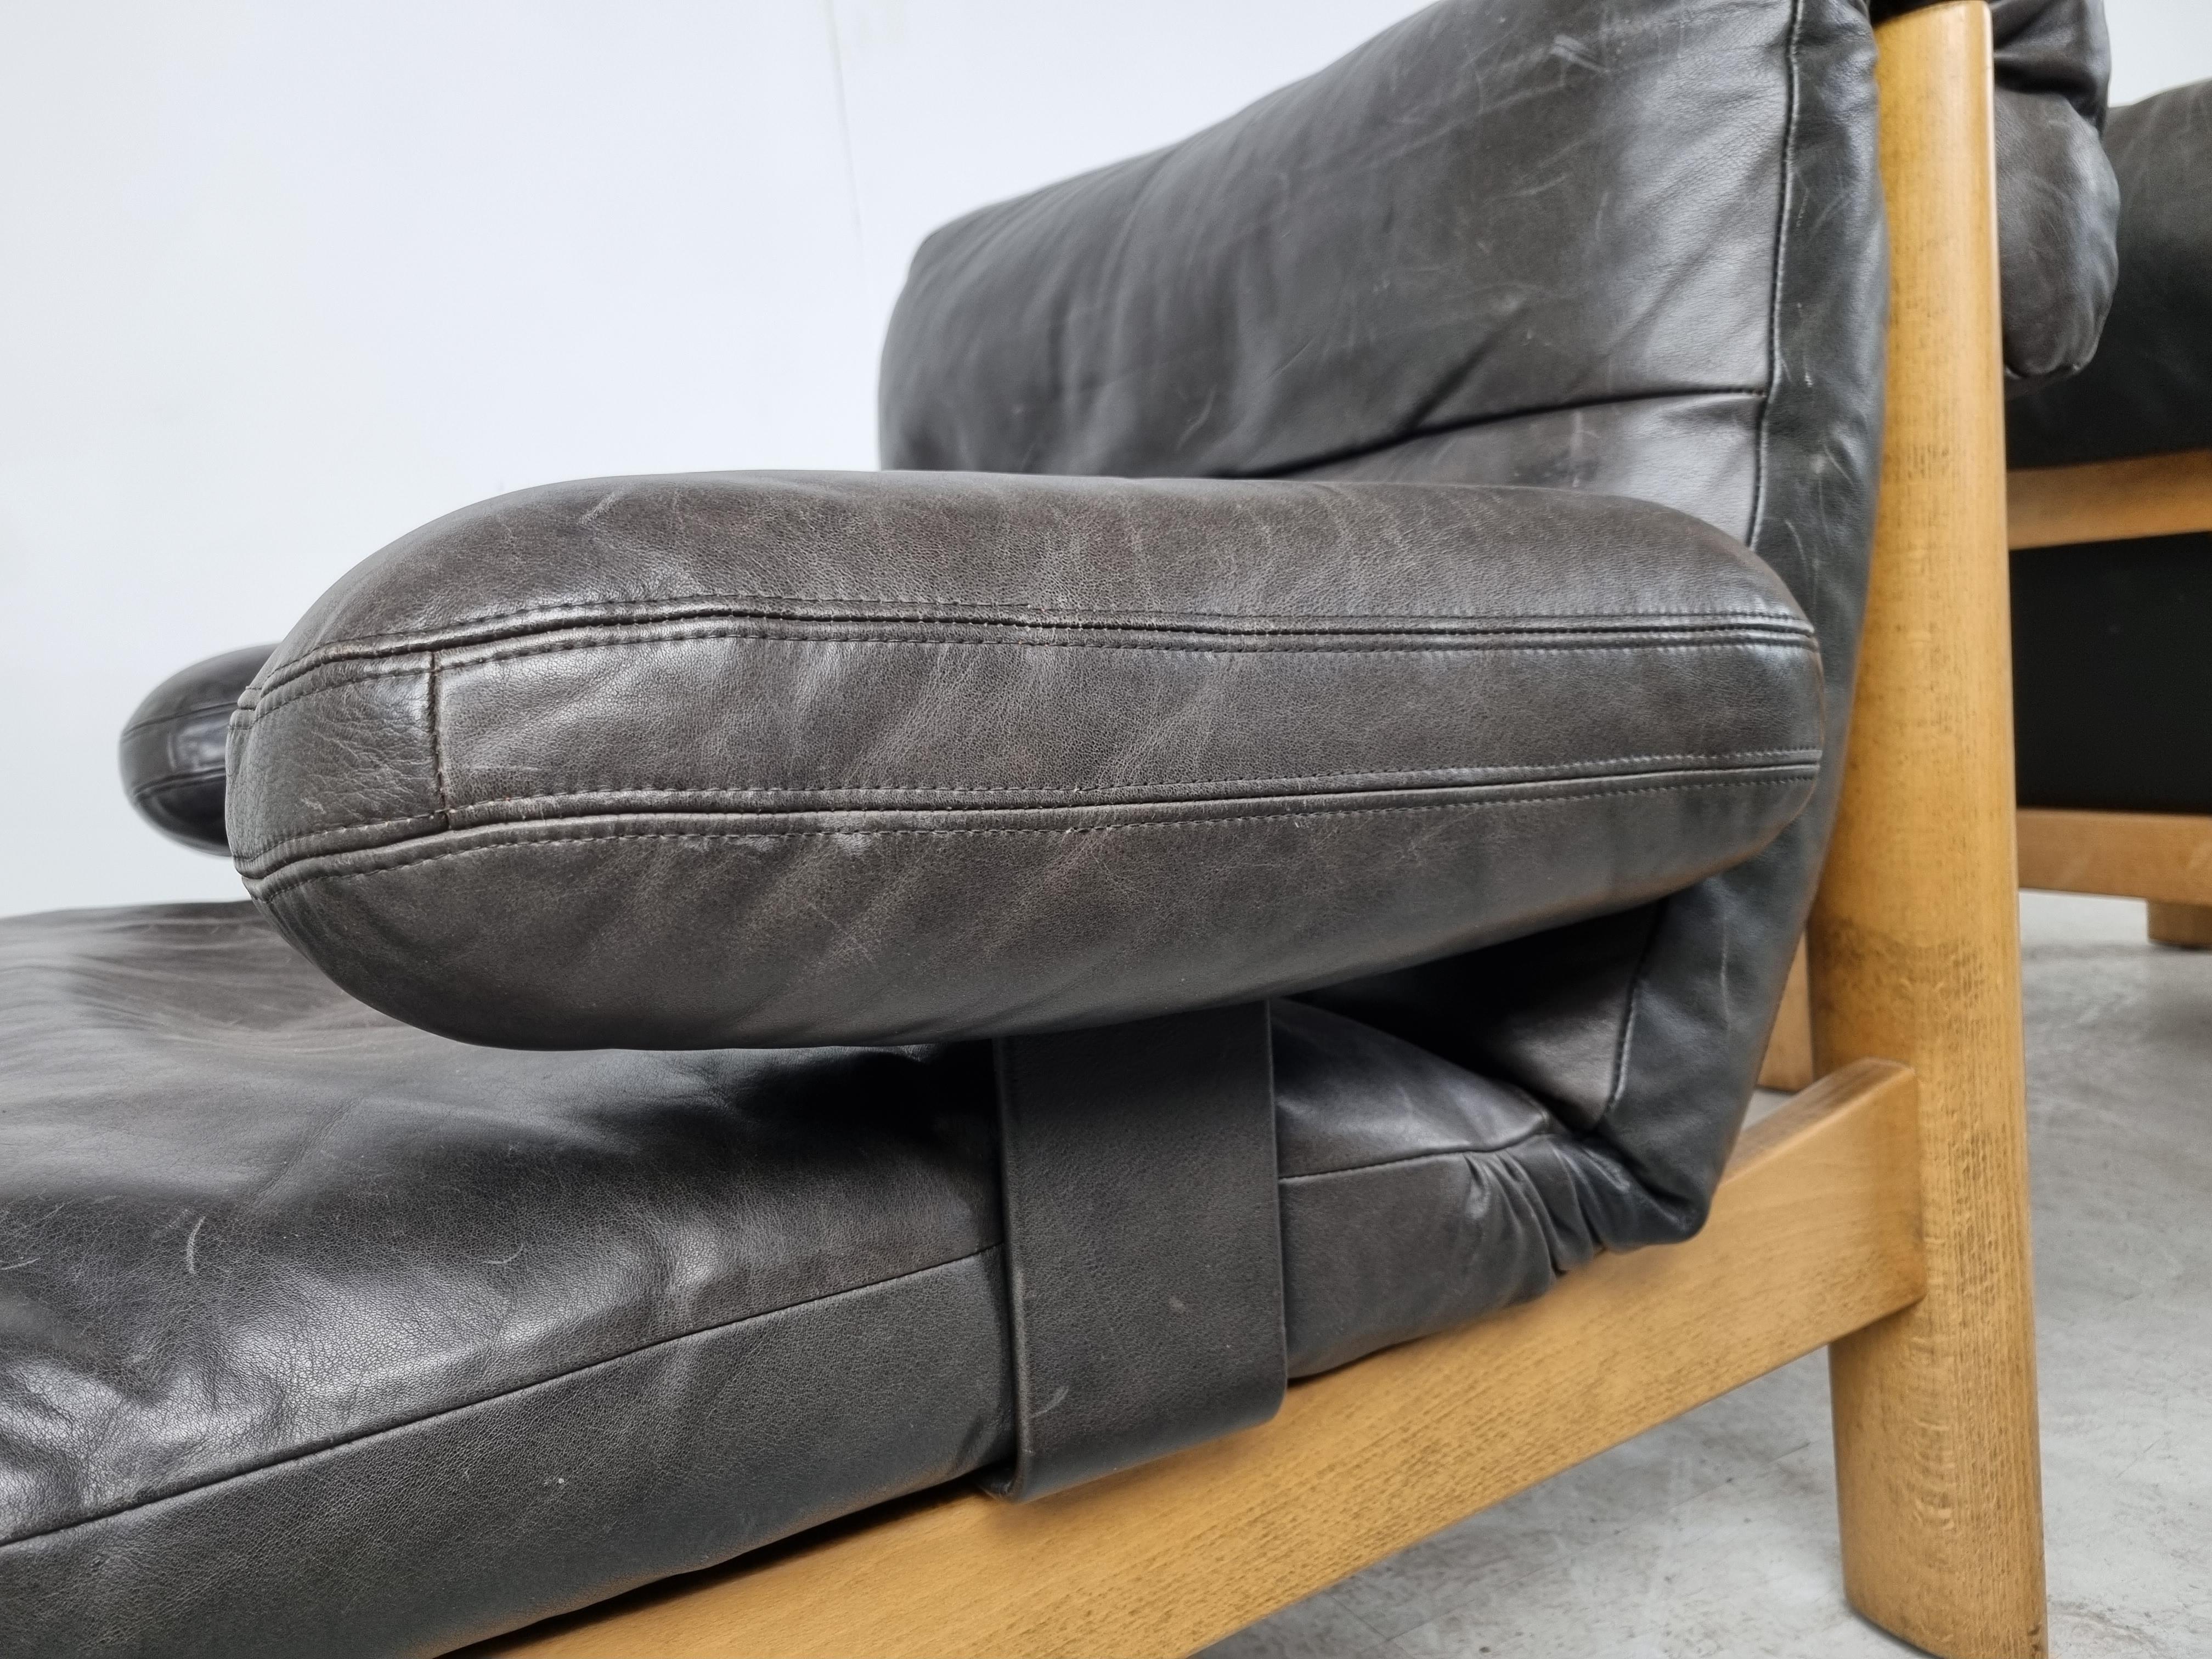 Pair of grey/black leather lounge chairs with solid oak frames.

They come with removable armrests.

Good condition with normal wear.

1970s - Germany

Dimensions
Height: 77cm/30.31